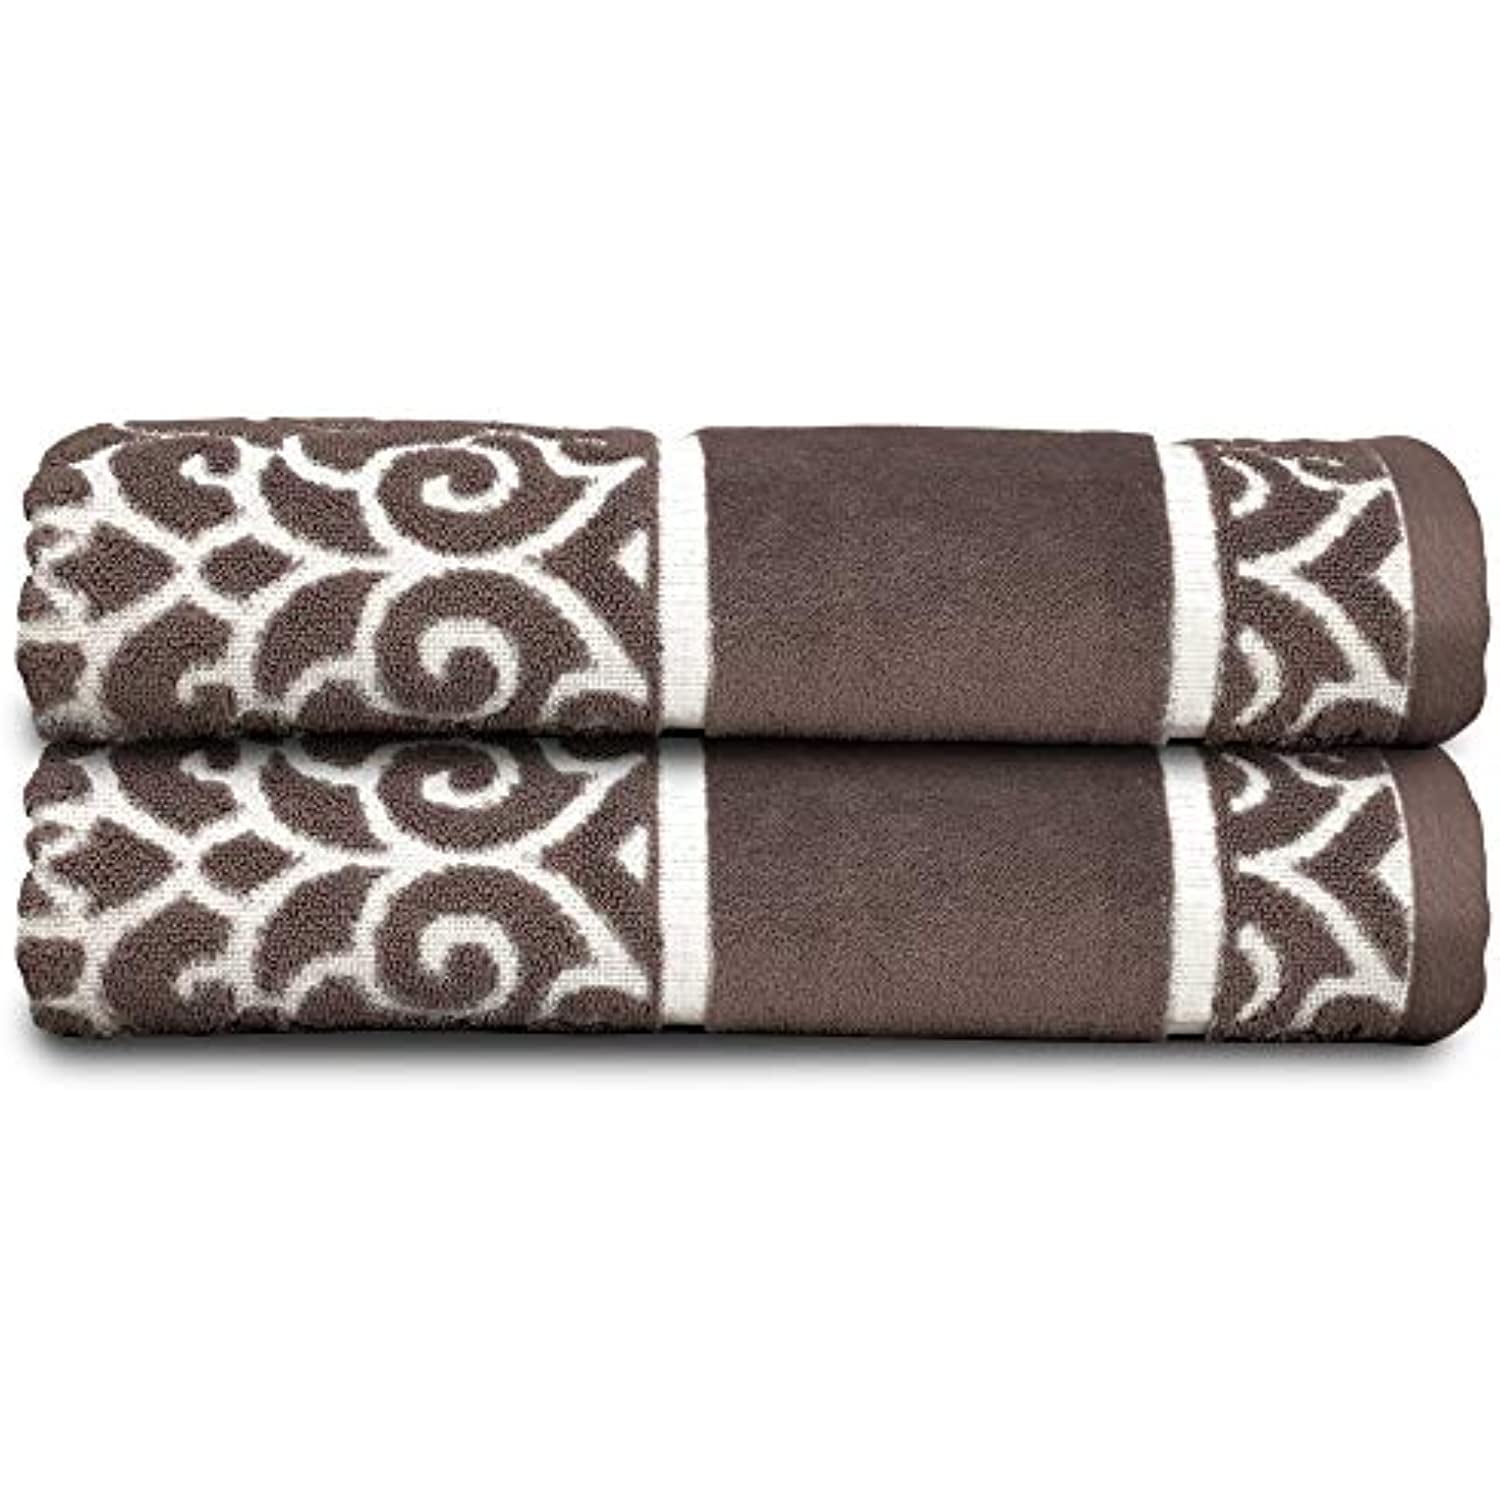 Get your MyTowels Premium Set now for just $49.98 with promo code R227!  Enjoy the luxury of designer towels that work for you and your…